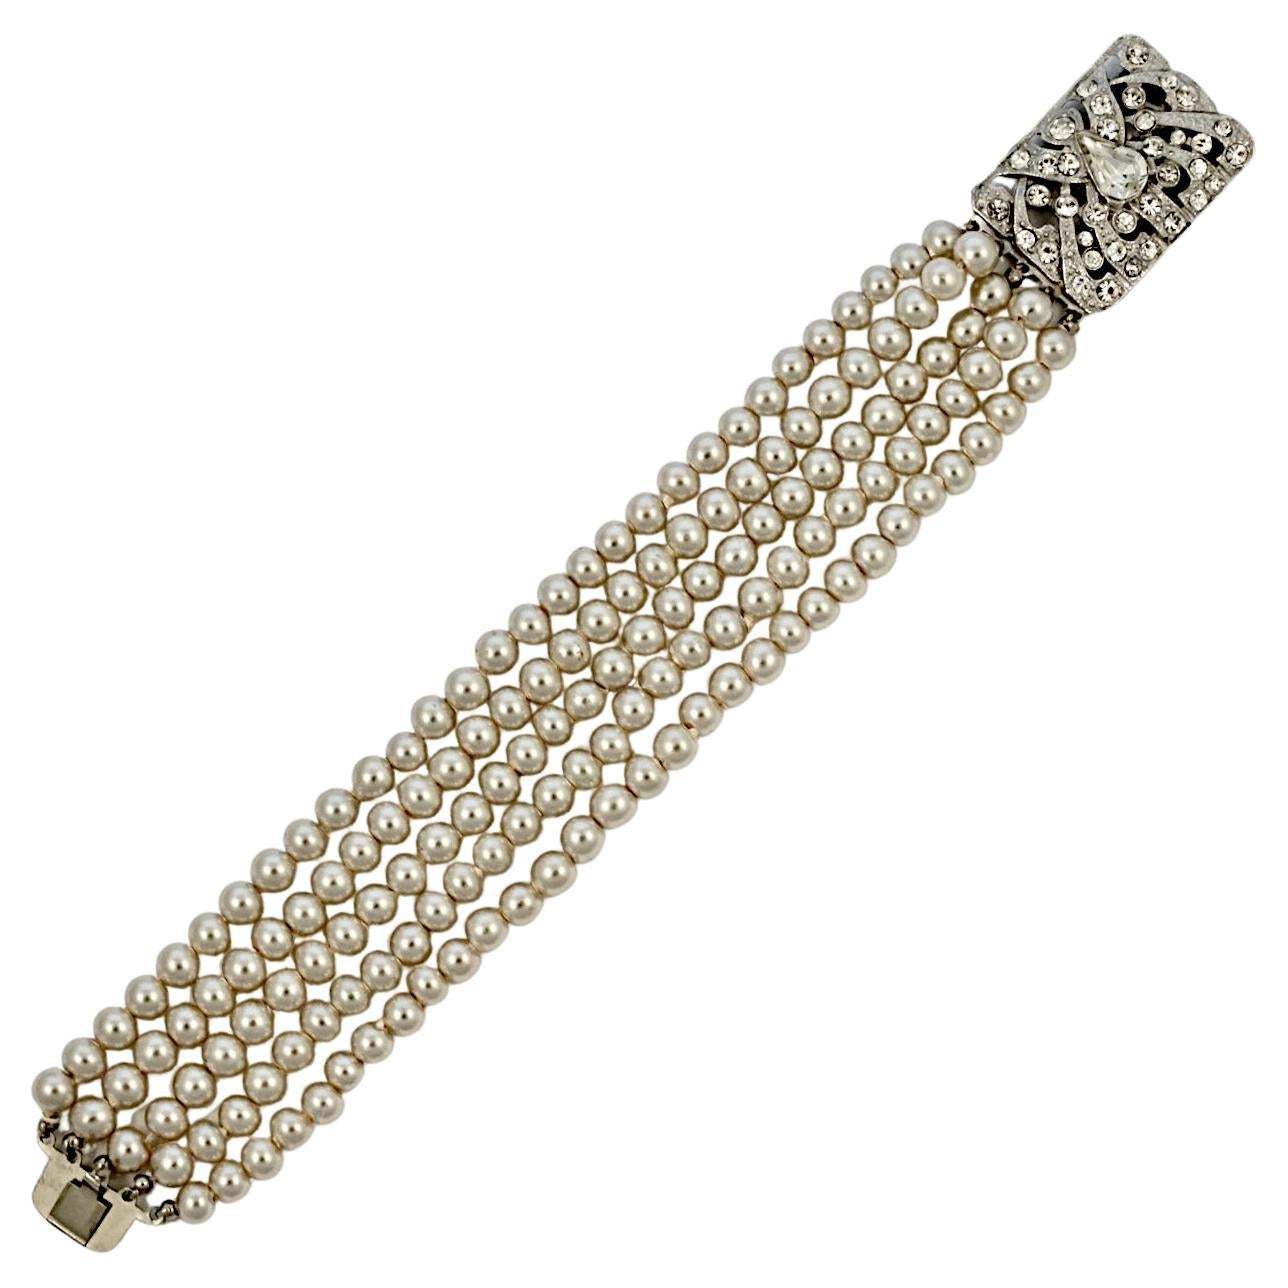 Five Strand Faux Pearl Bracelet with a Rhinestone Silver Tone Clasp For Sale